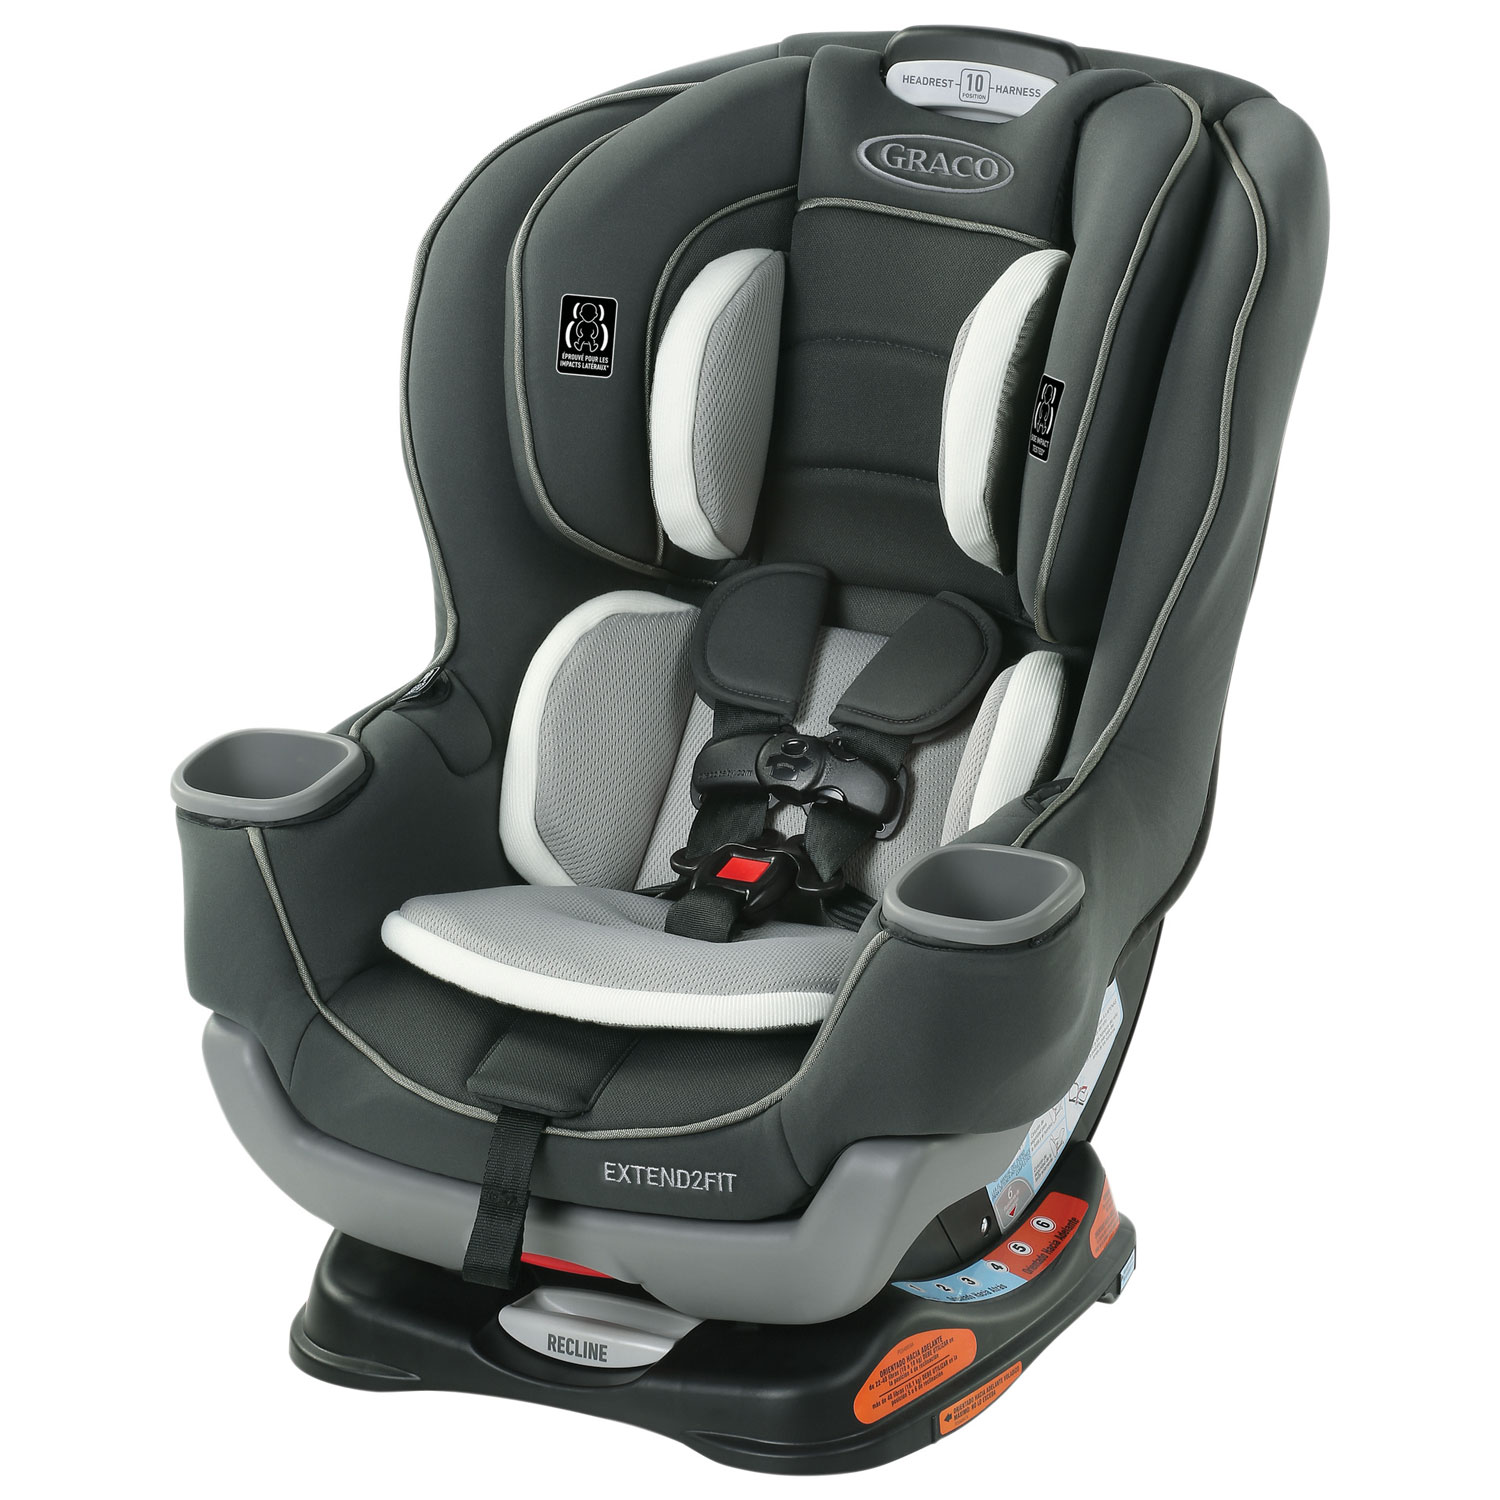 Graco Extend2Fit 3-in-1 Convertible High-back Booster Car Seat - Carter